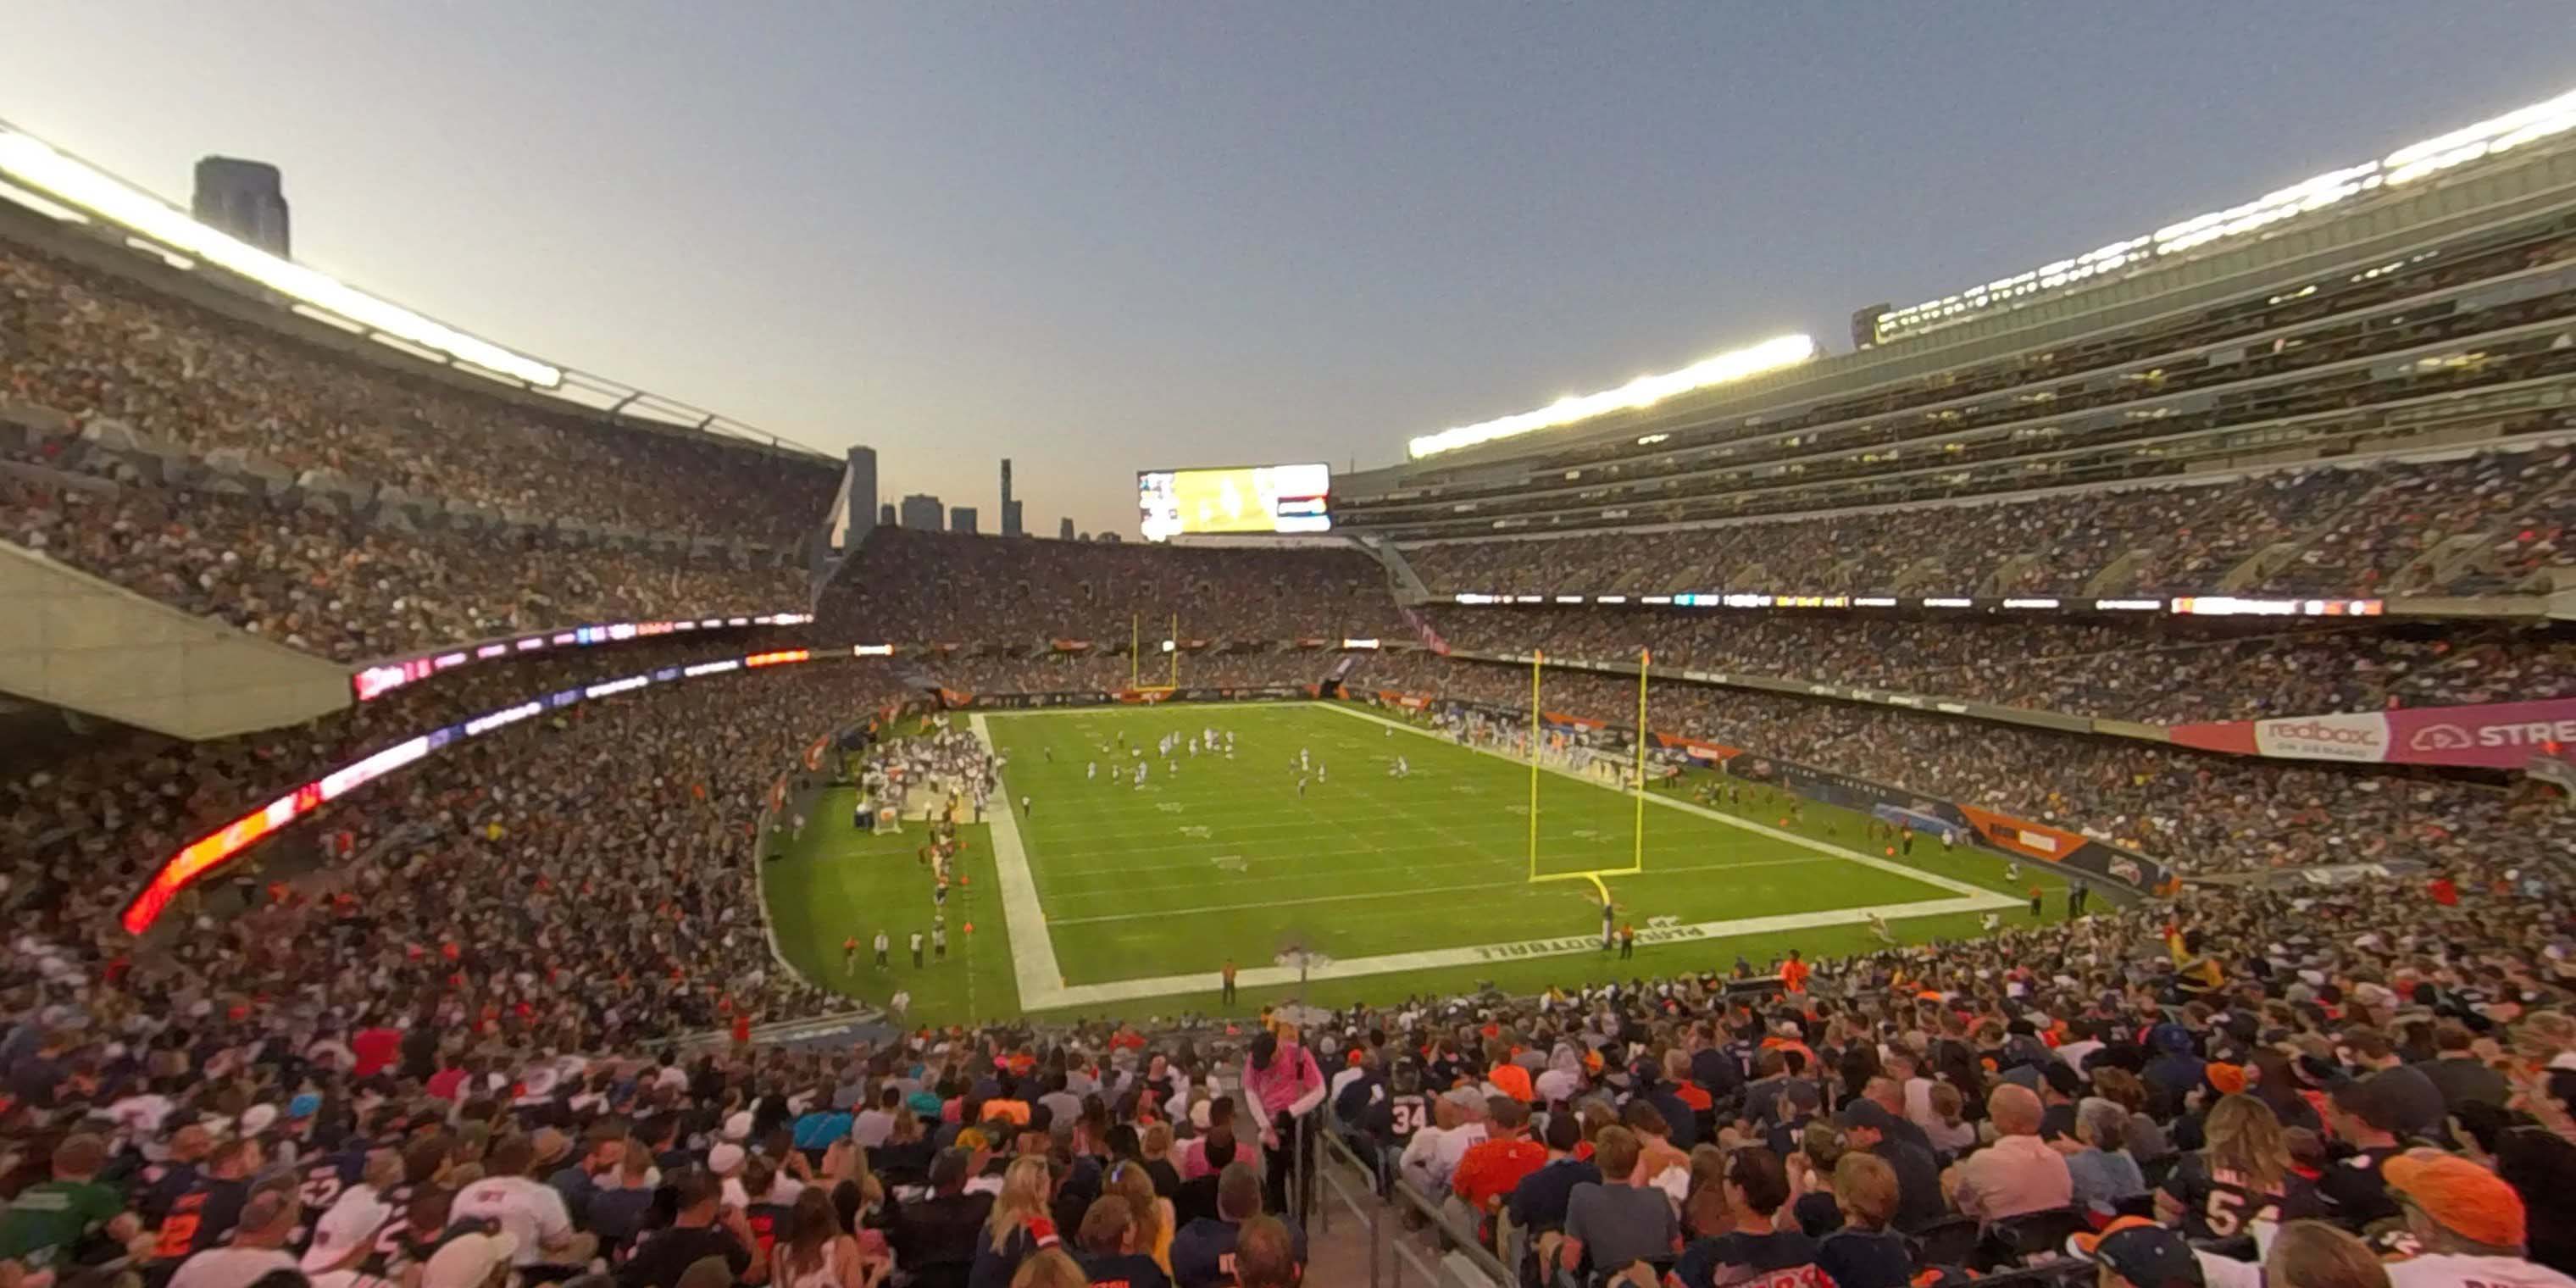 section 224 panoramic seat view  for football - soldier field